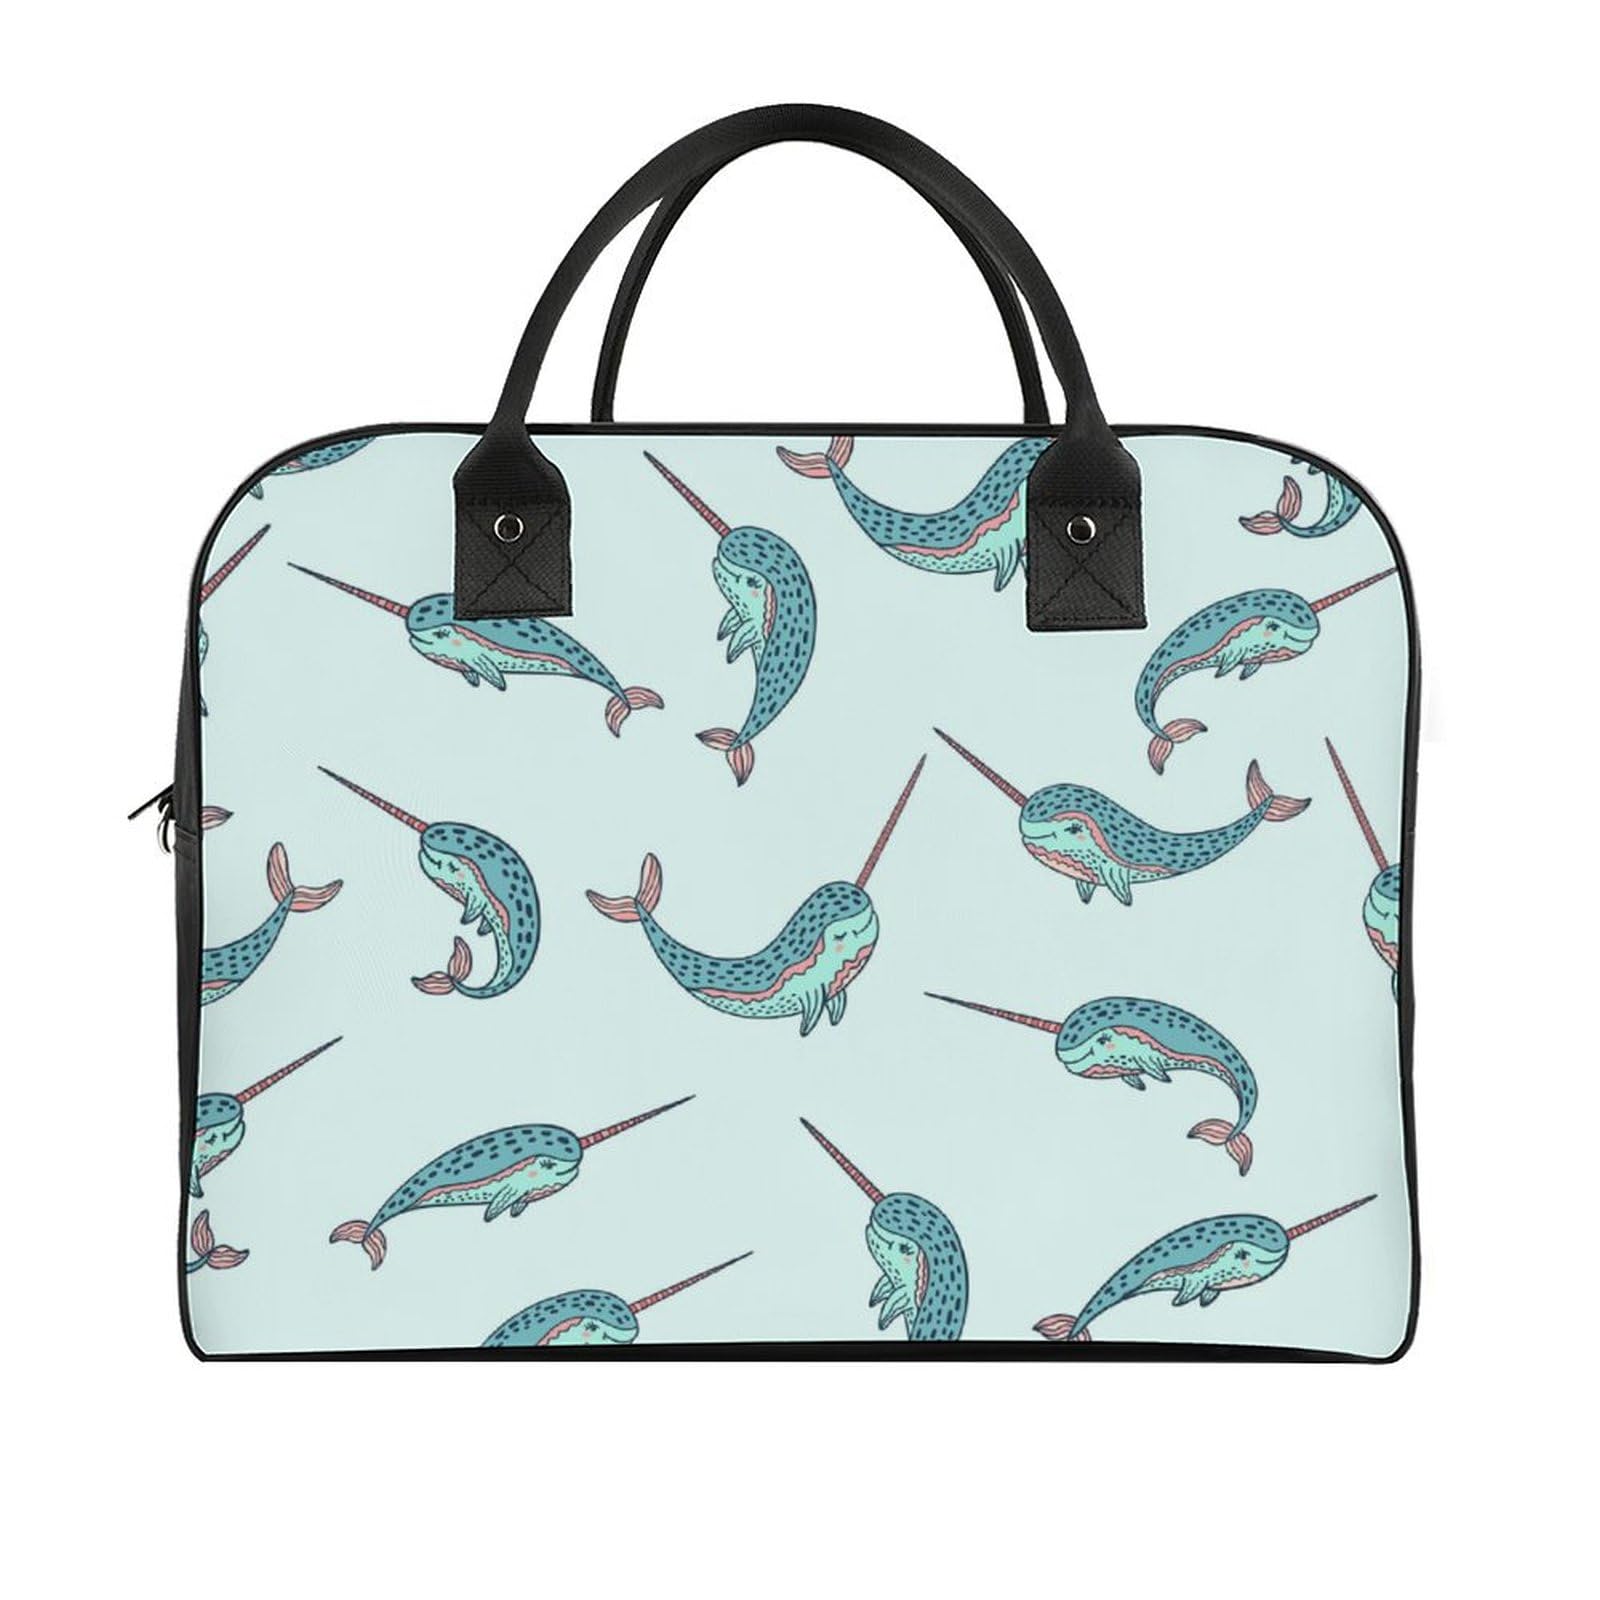 Narwhal Dream Large Crossbody Bag Laptop Bags Shoulder Handbags Tote with Strap for Travel Office